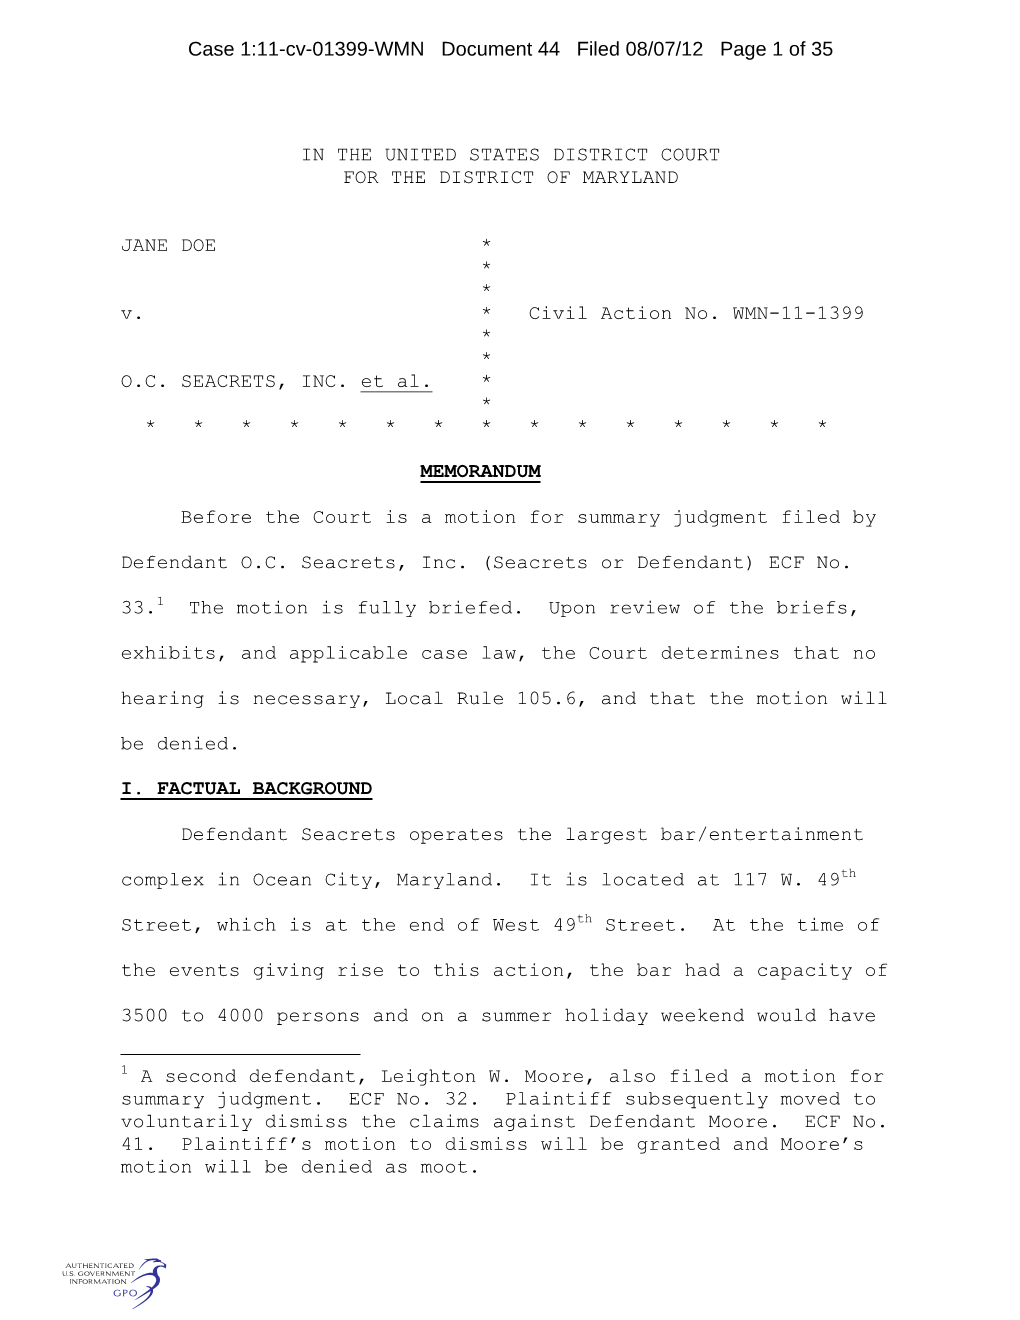 Case 1:11-Cv-01399-WMN Document 44 Filed 08/07/12 Page 1 of 35